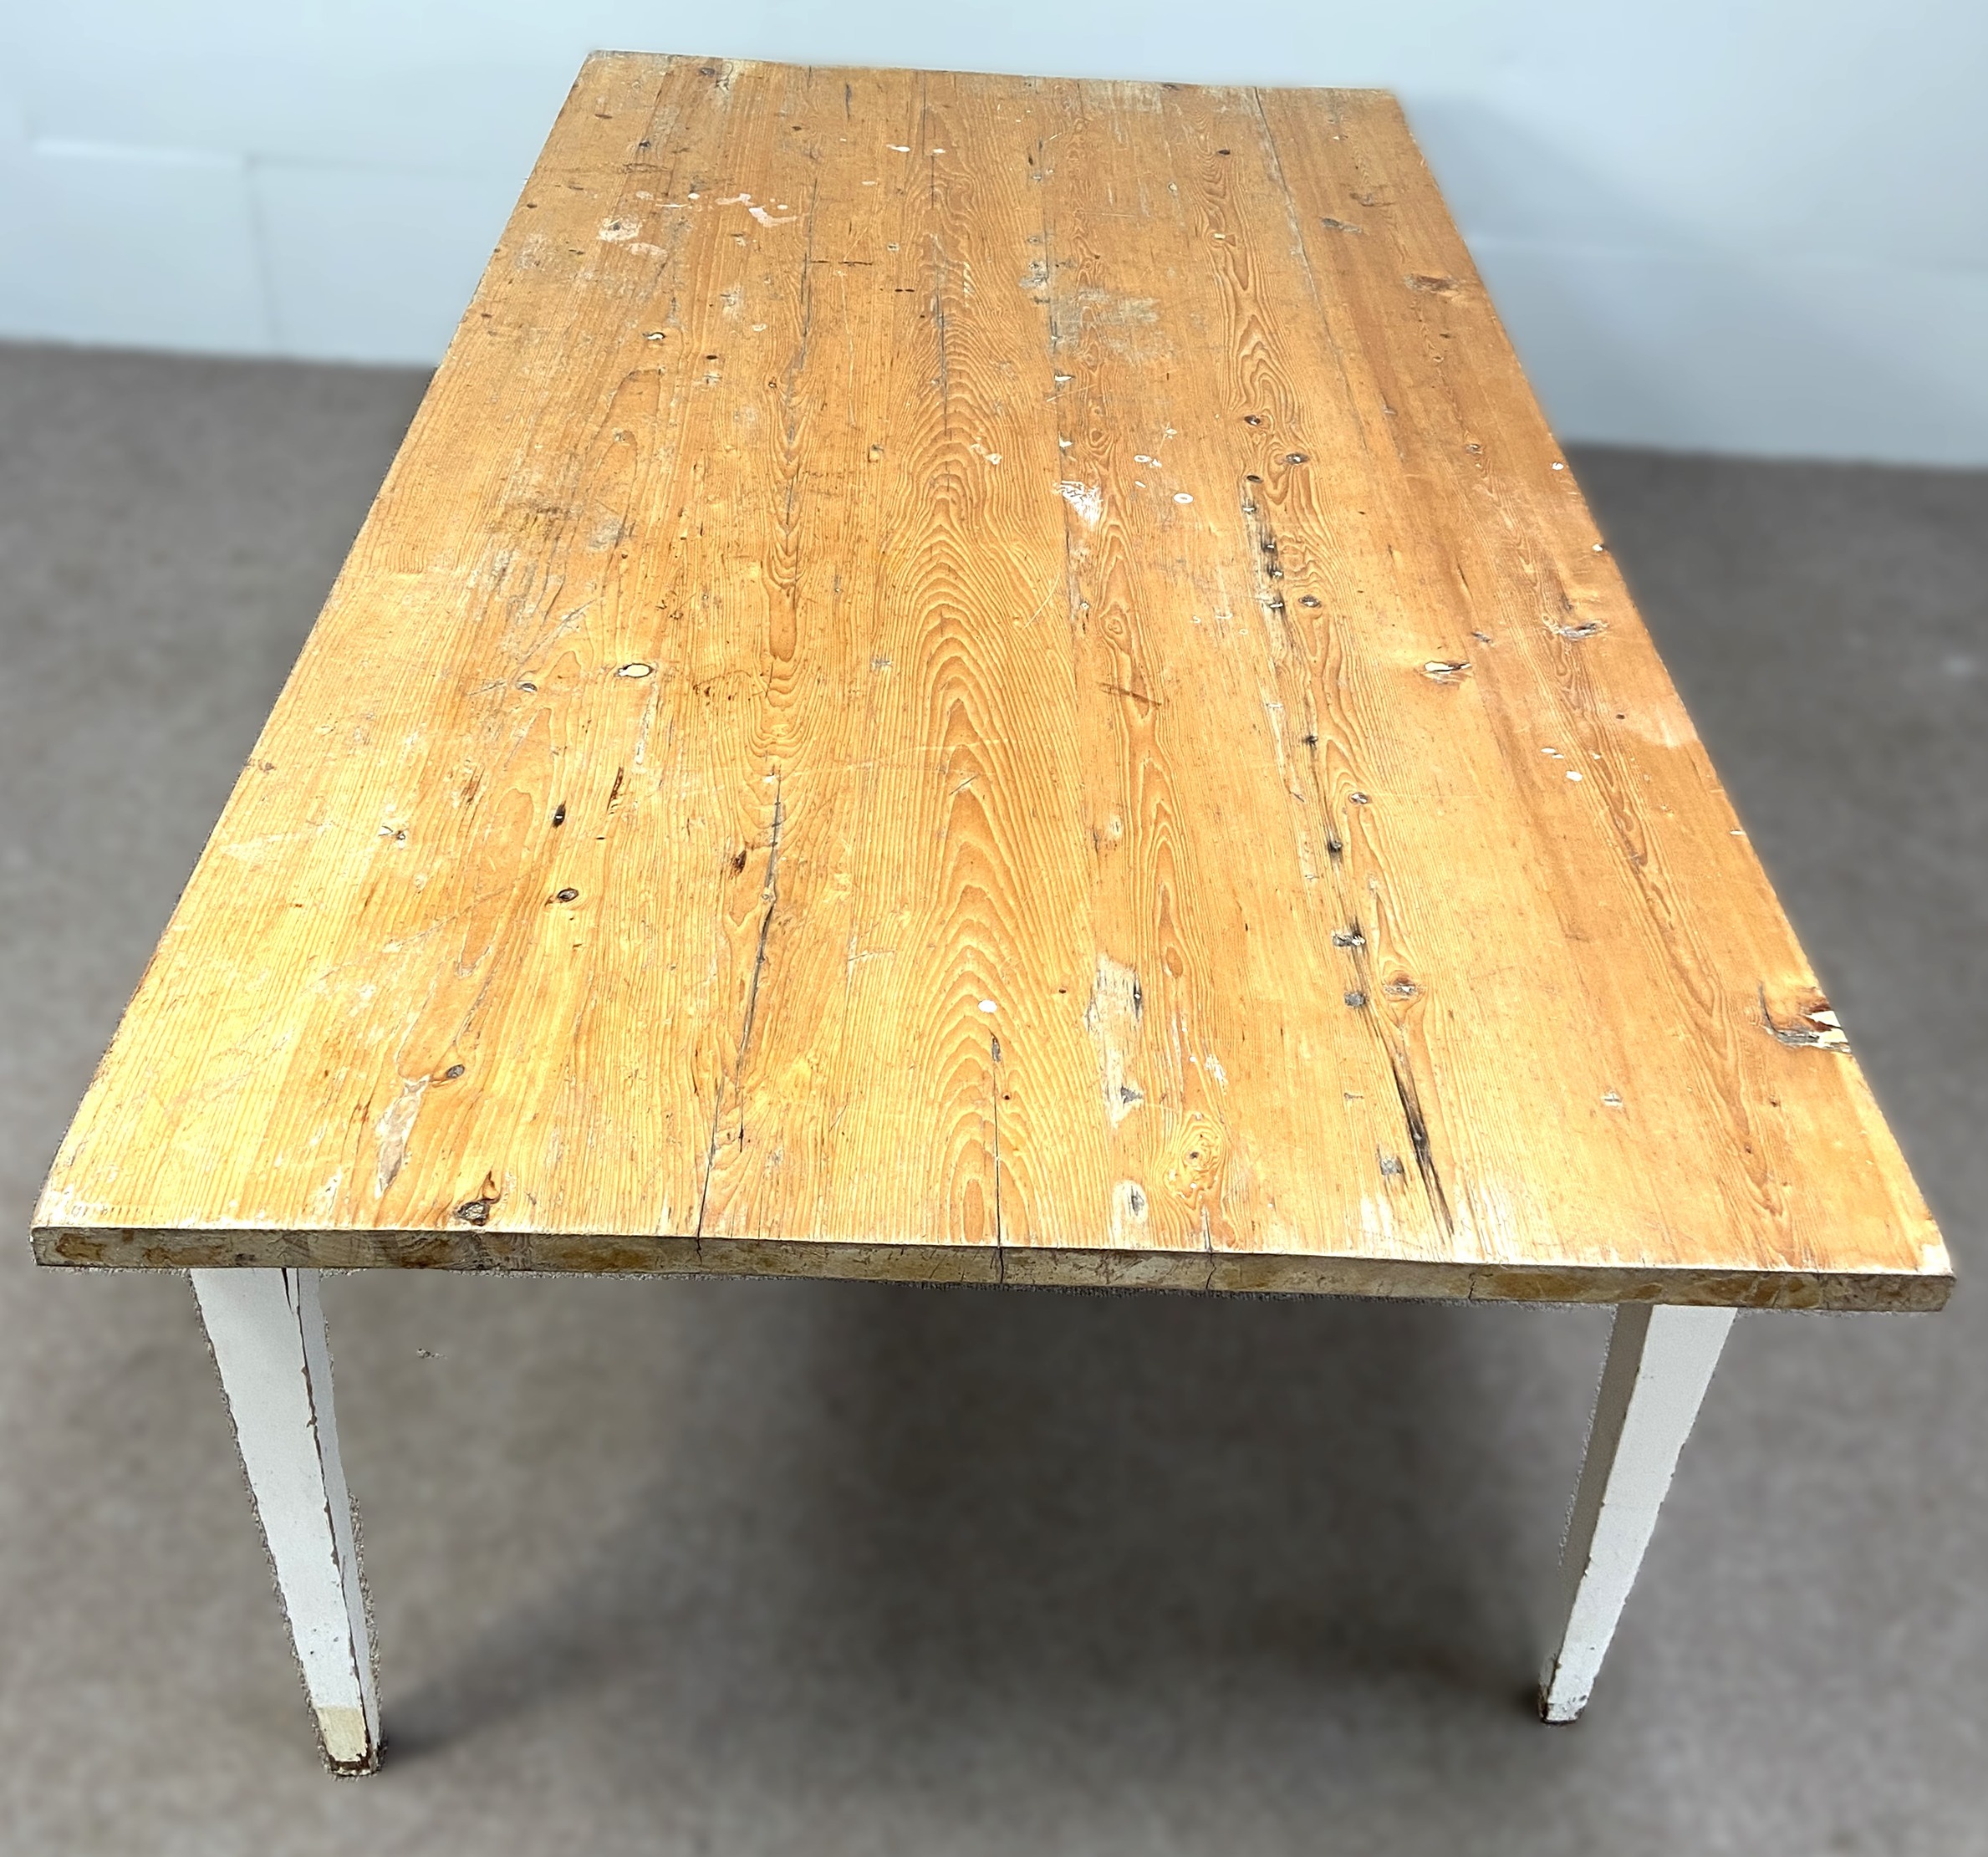 A large vintage stripped pine and white painted kitchen table, with rectangular top and four tapered